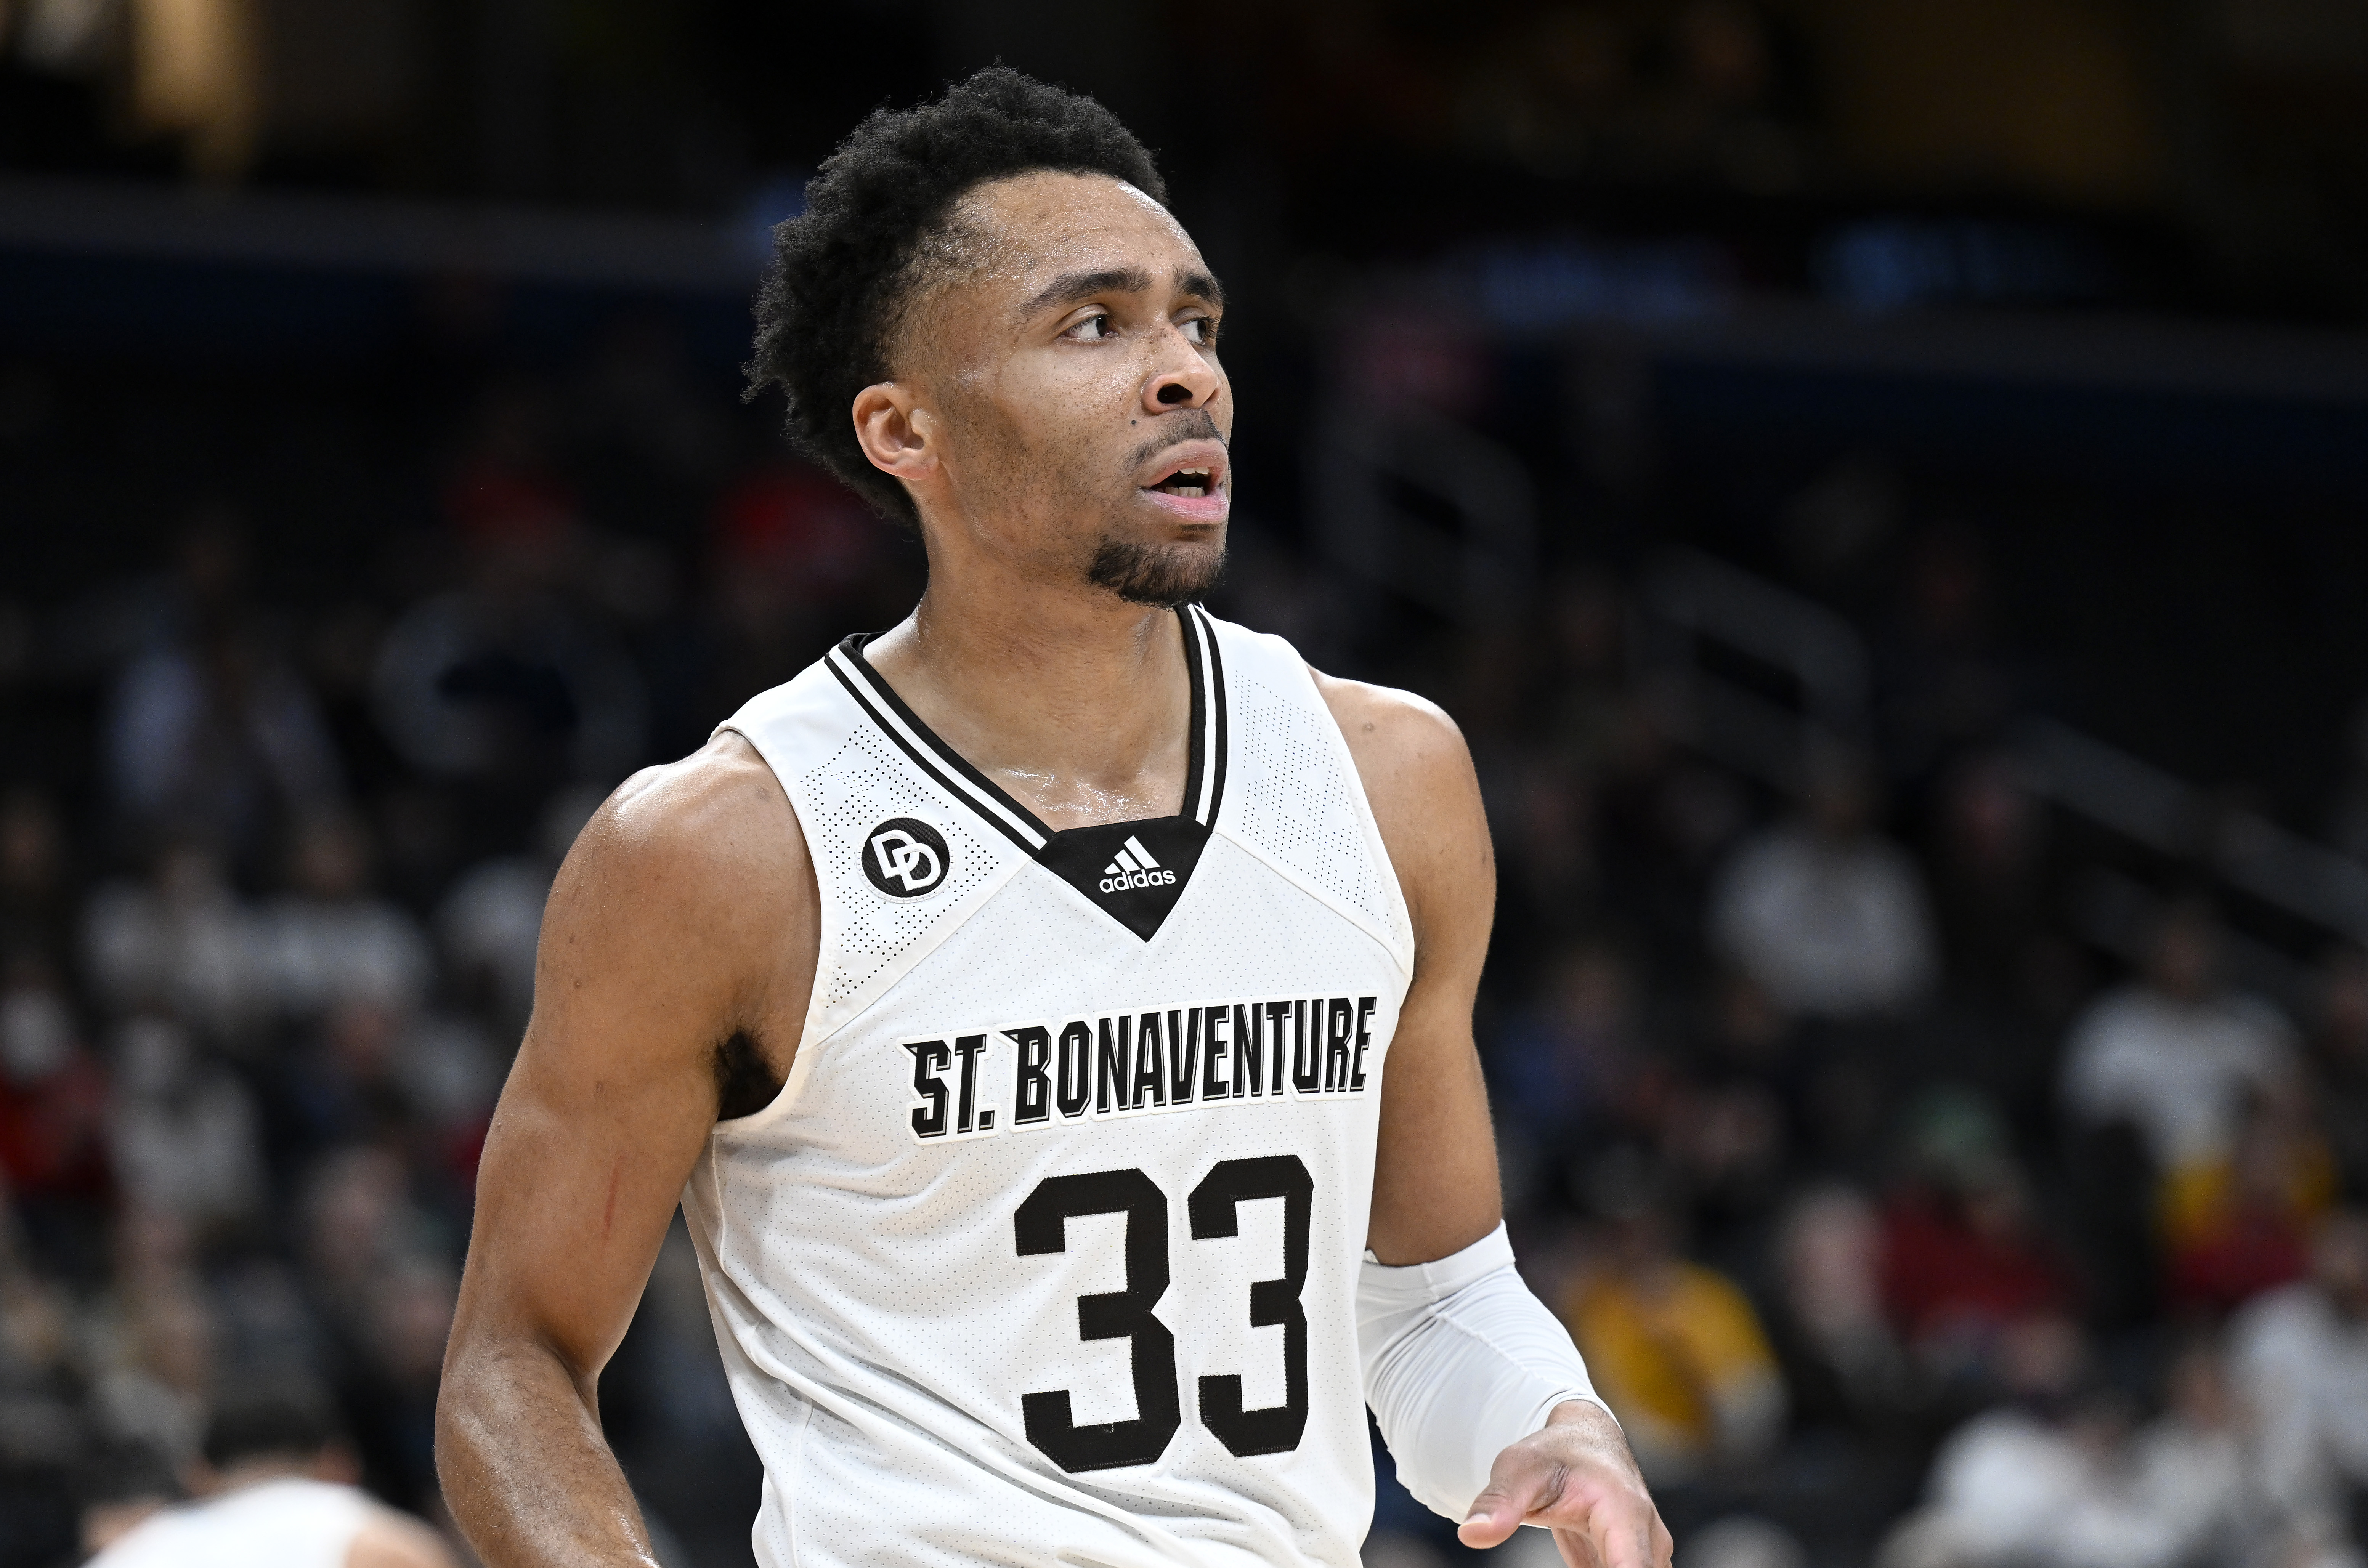 Jalen Adaway #33 of the St. Bonaventure Bonnies plays against the Saint Louis Billikens during the Quarterfinals of the 2022 Atlantic 10 Men’s Basketball Tournament at Capital One Arena on March 11, 2022 in Washington, DC.